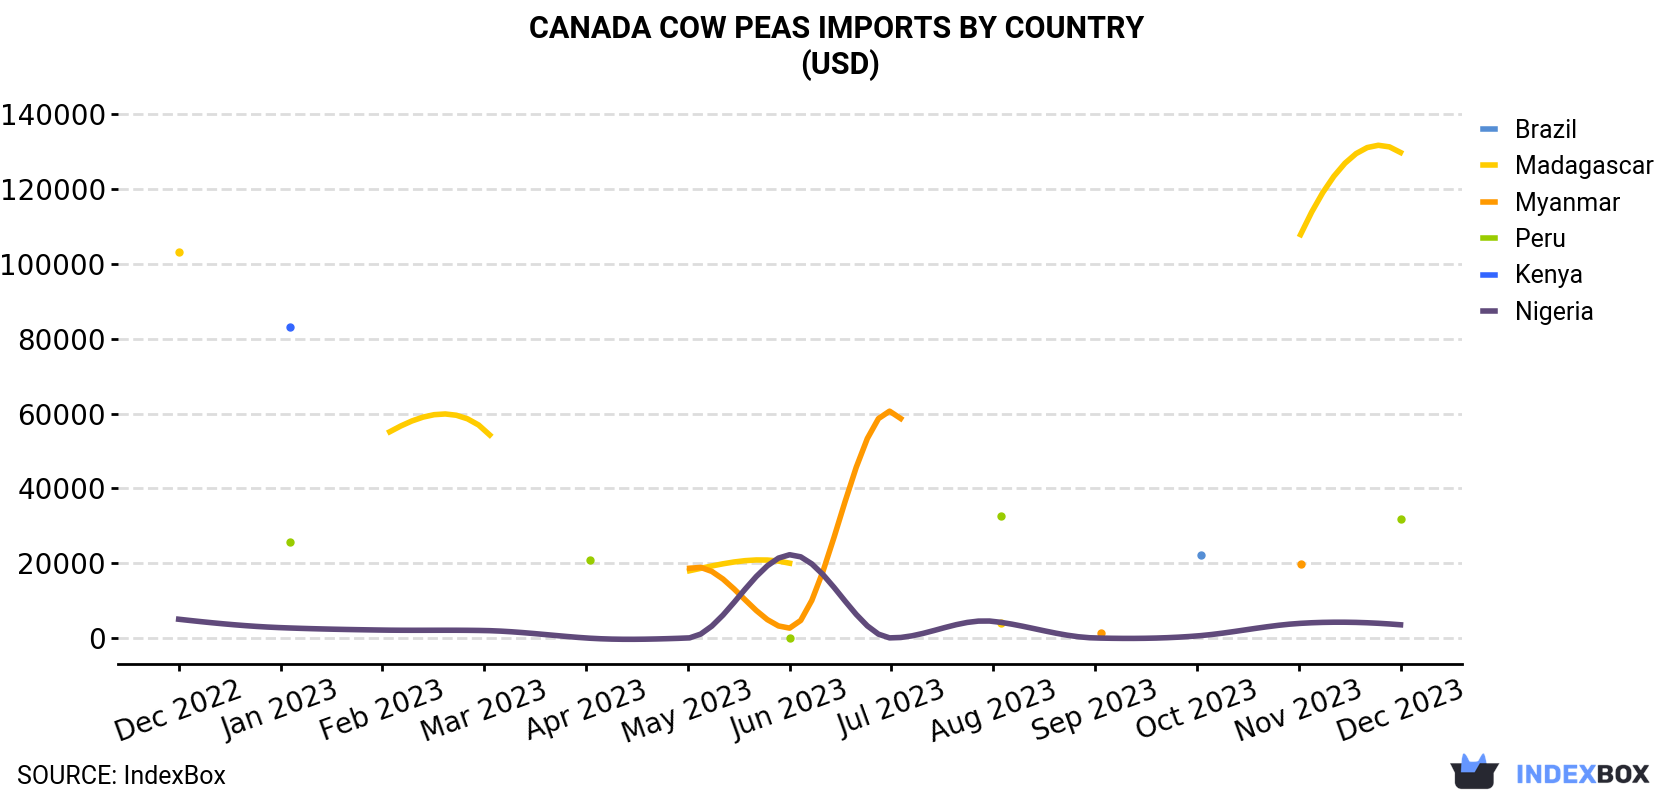 Canada Cow Peas Imports By Country (USD)